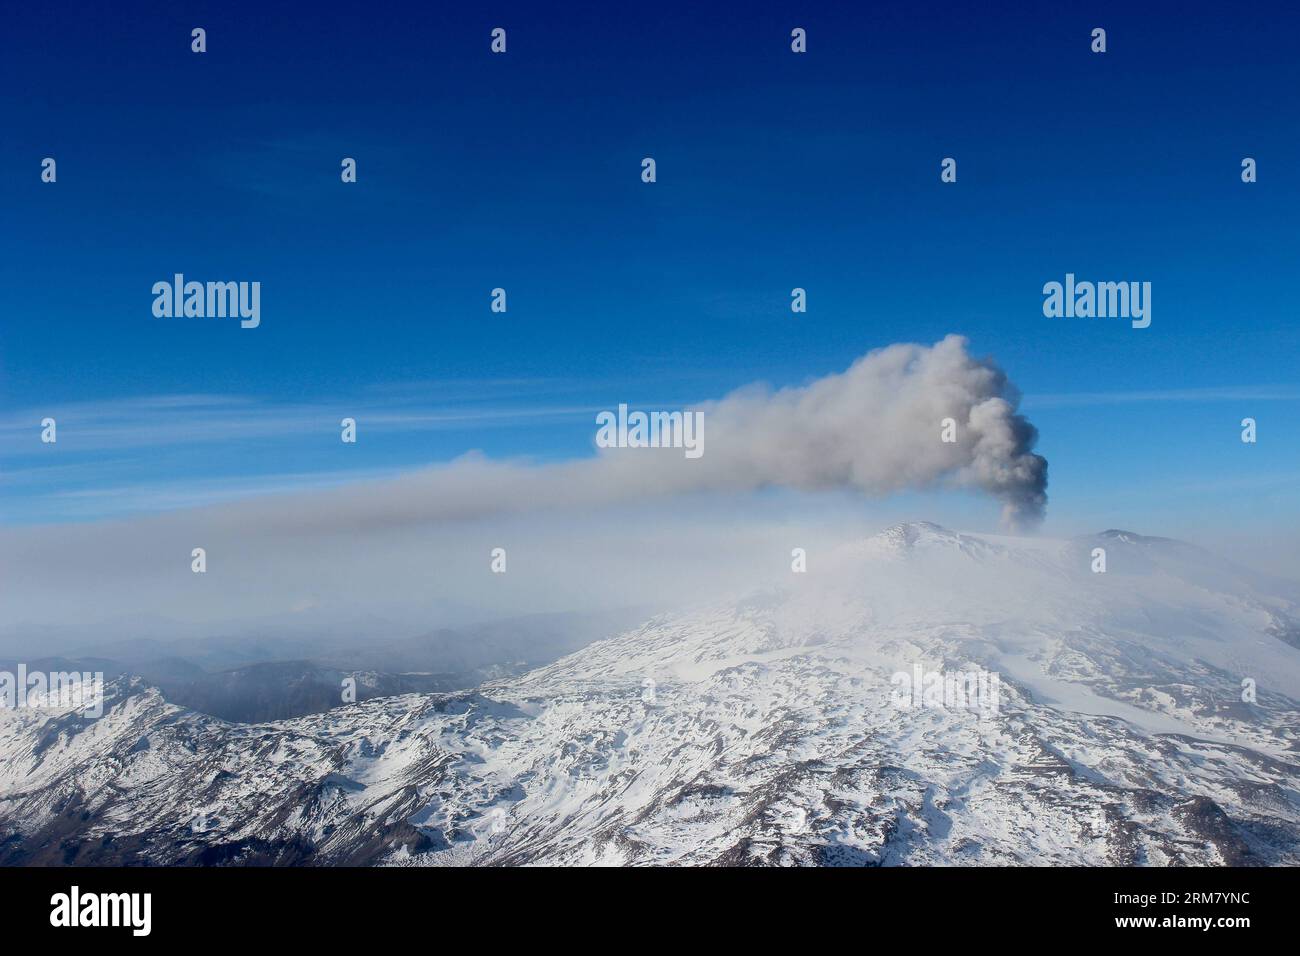 (140321) -- BIOBIO REGION, March 21, 2014 (Xinhua) -- Image taken on May 24, 2013, provided by Chile s National Service of Geology and Mining (SERNAGEOMIN) and Chile s National Emergency Office (ONEMI), shows Copahue volcano spewing ash in Biobio Region, Chile. The Copahue volcano with 3,000 meters high is located in the Andes mountain range. On Thursday the ONEMI decreed that the activity of the volcano is at Orange Level, which means that could erupt in a time not determined. Specifically the institution reported that the monitoring station installed in the area recorded an increase in volca Stock Photo